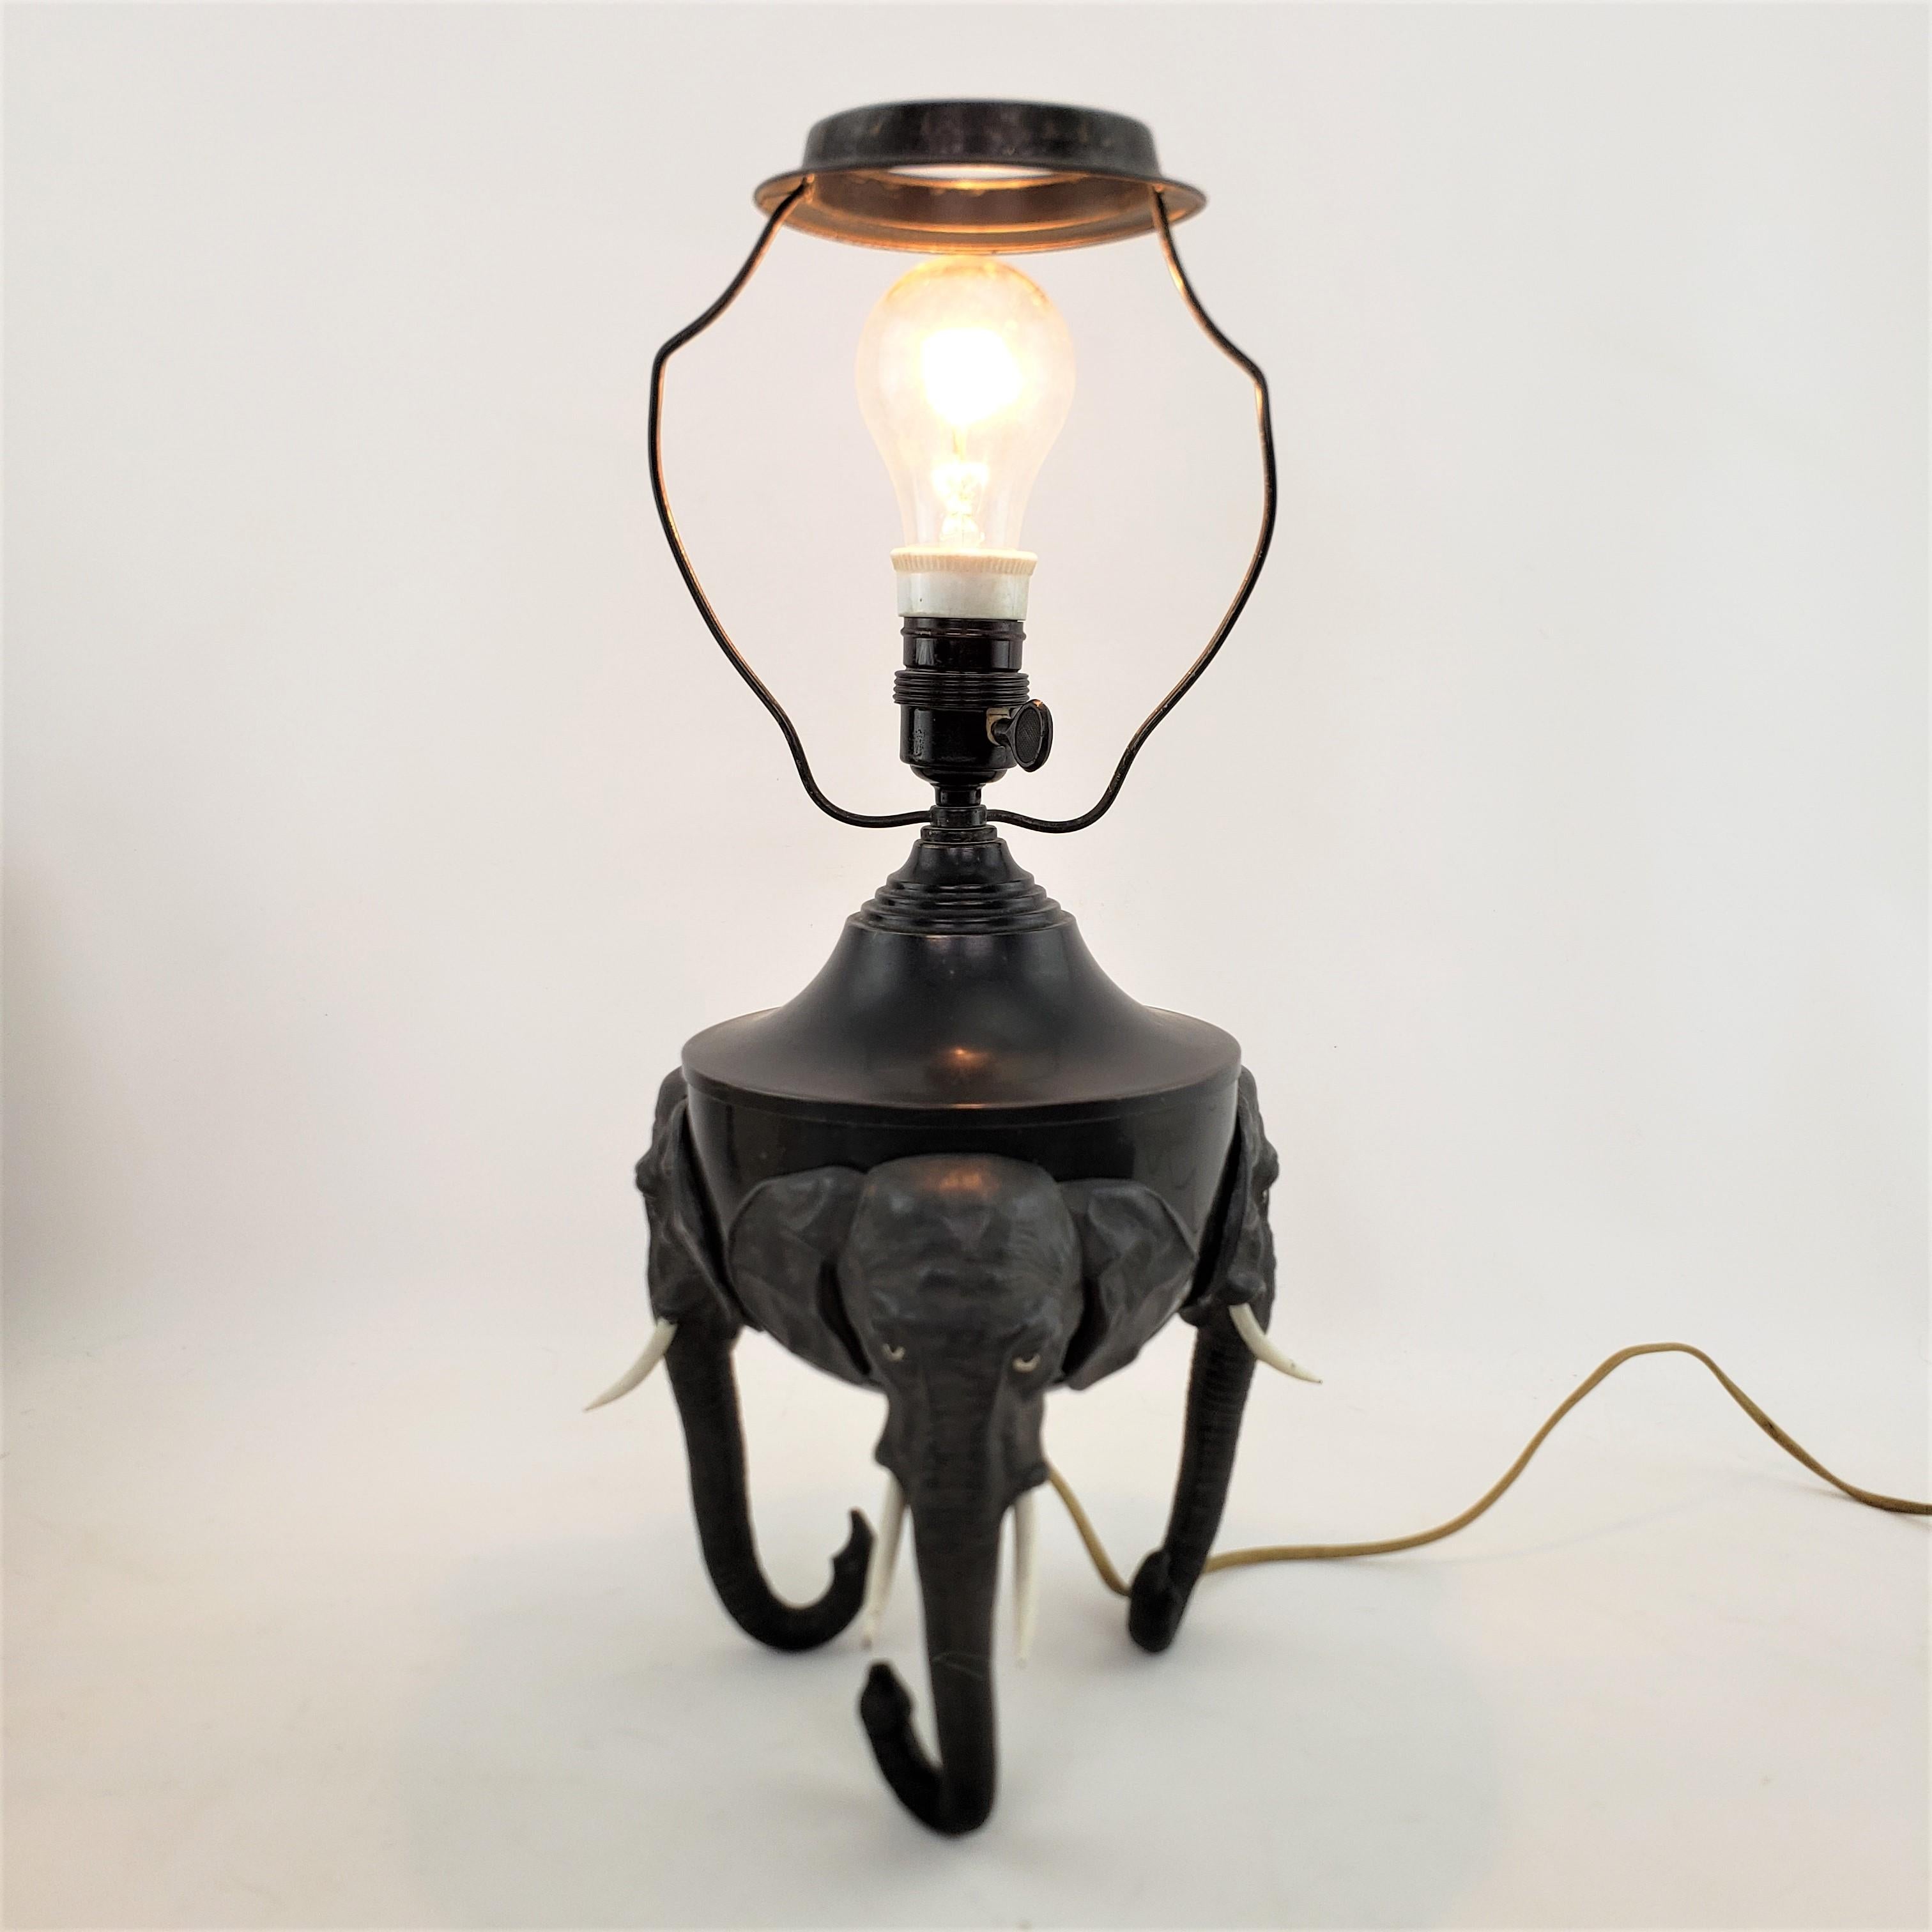 This unique metal table lamp is unsigned, but presumed to have originated from France and dating to approximately 1920 and done in the period Art Deco style. The lamp is composed of a metal body with three cast spelter elephant heads on the sides,